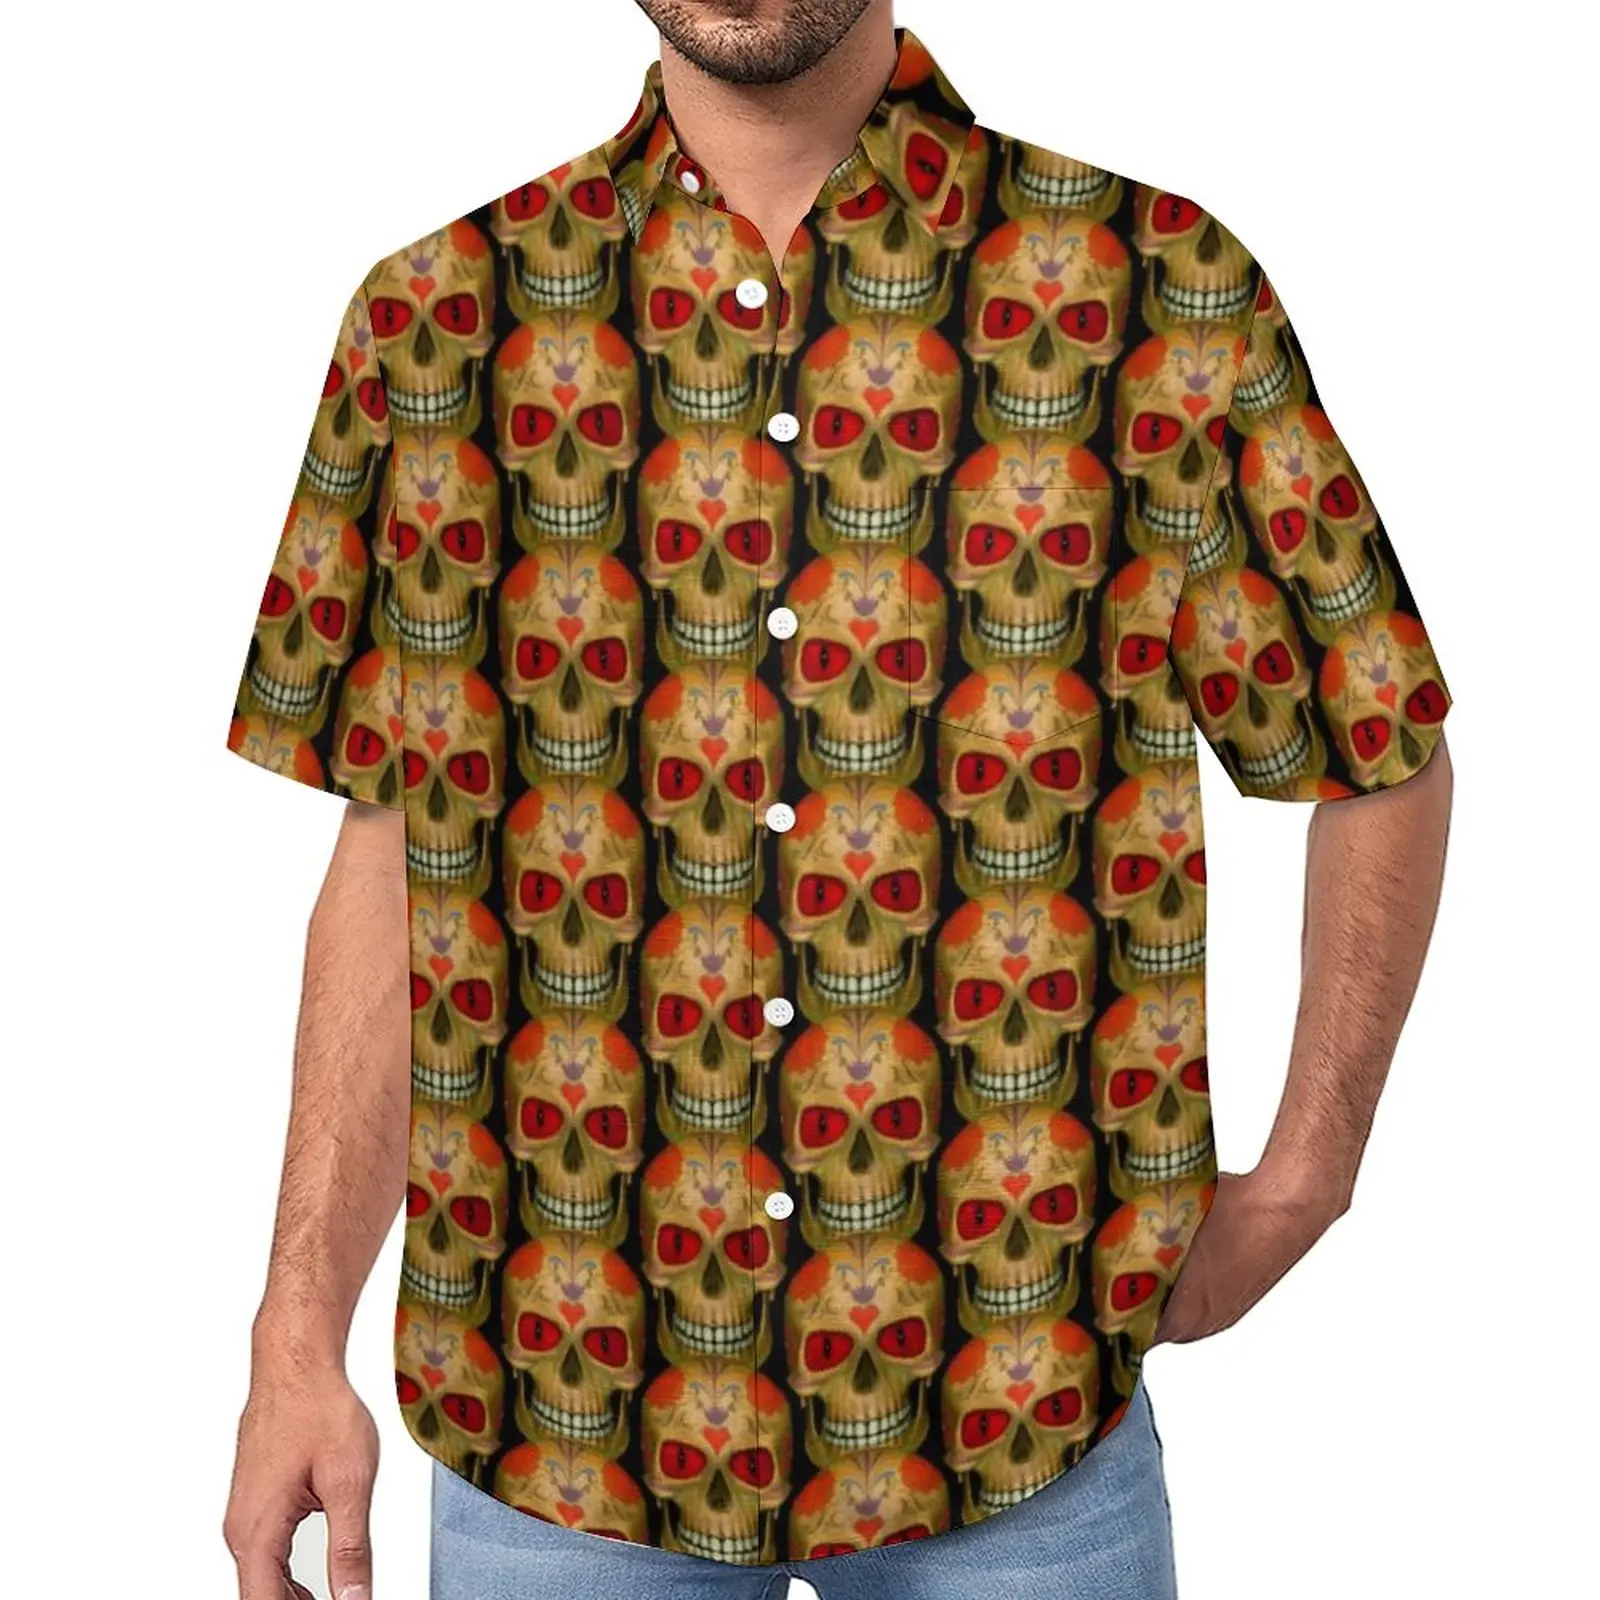 

Red Eyed Sugar Skull Casual Shirts Zombie Dead Vacation Shirt Summer Fashion Blouses Men Print Plus Size